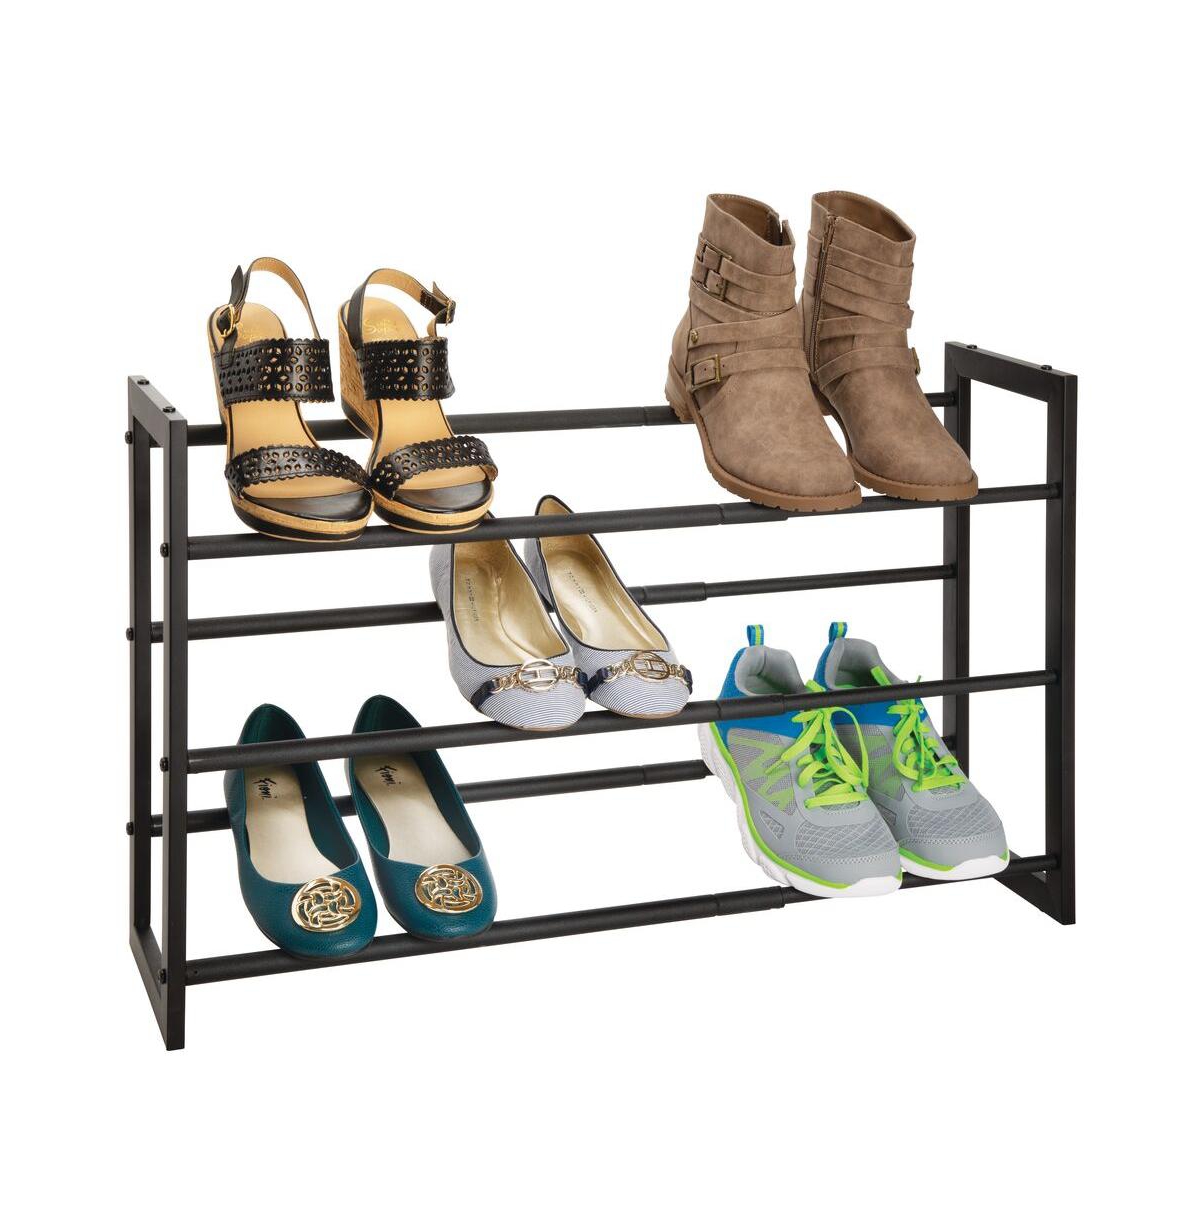 Metal 3 Tier Adjustable/Expandable Shoe and Boot Rack - White/gray